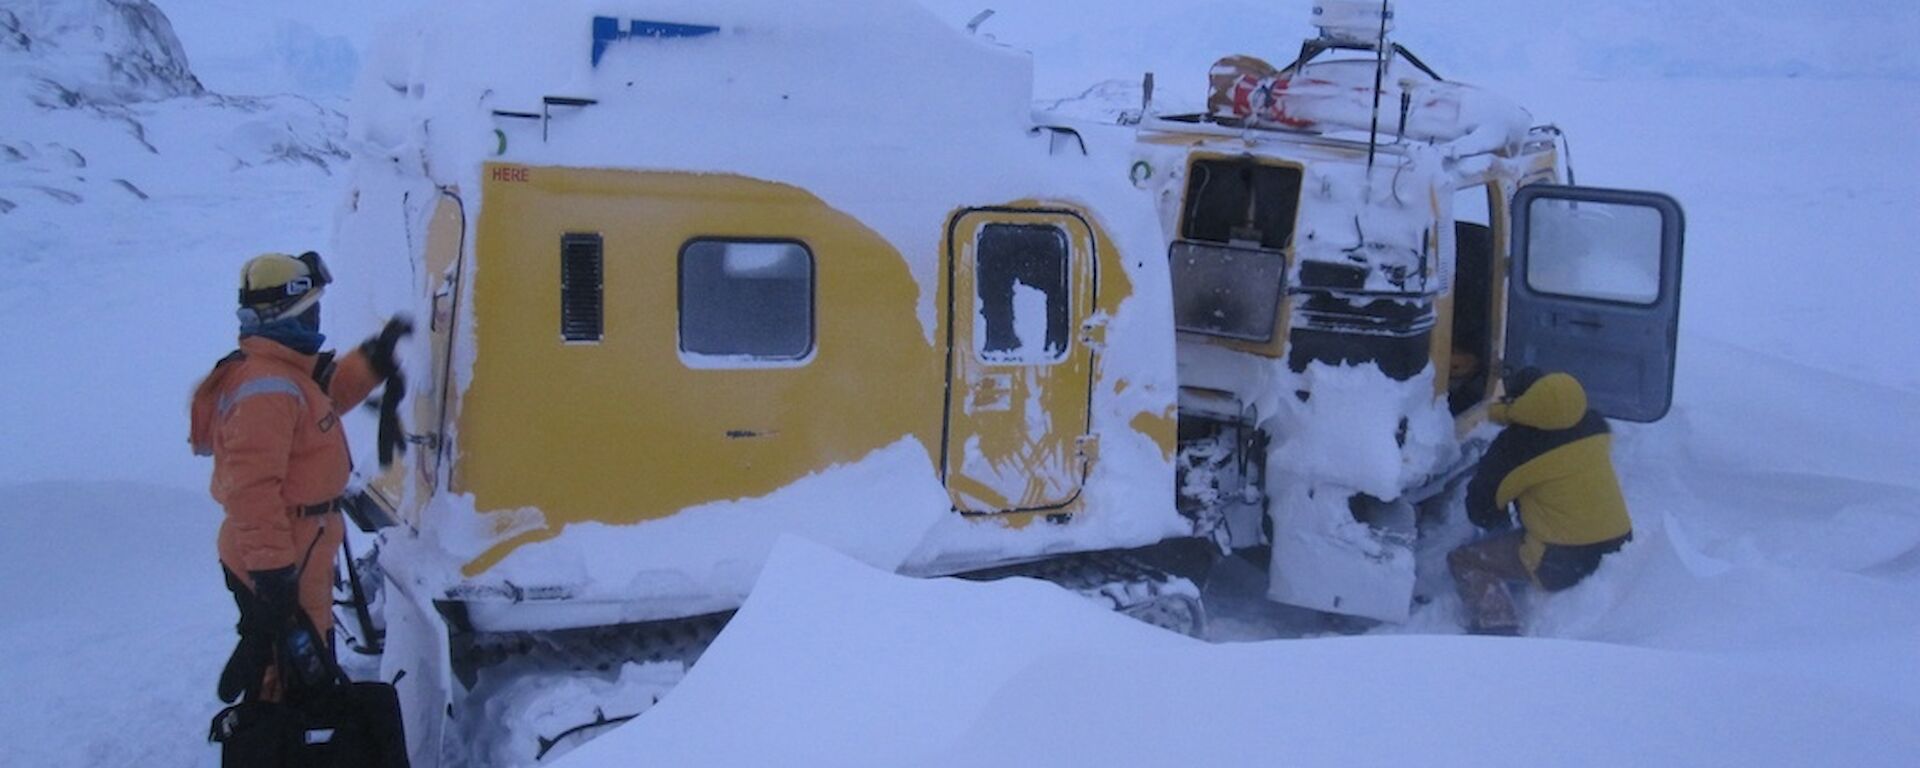 Oversnow vehicle with snow covering the roof and sides